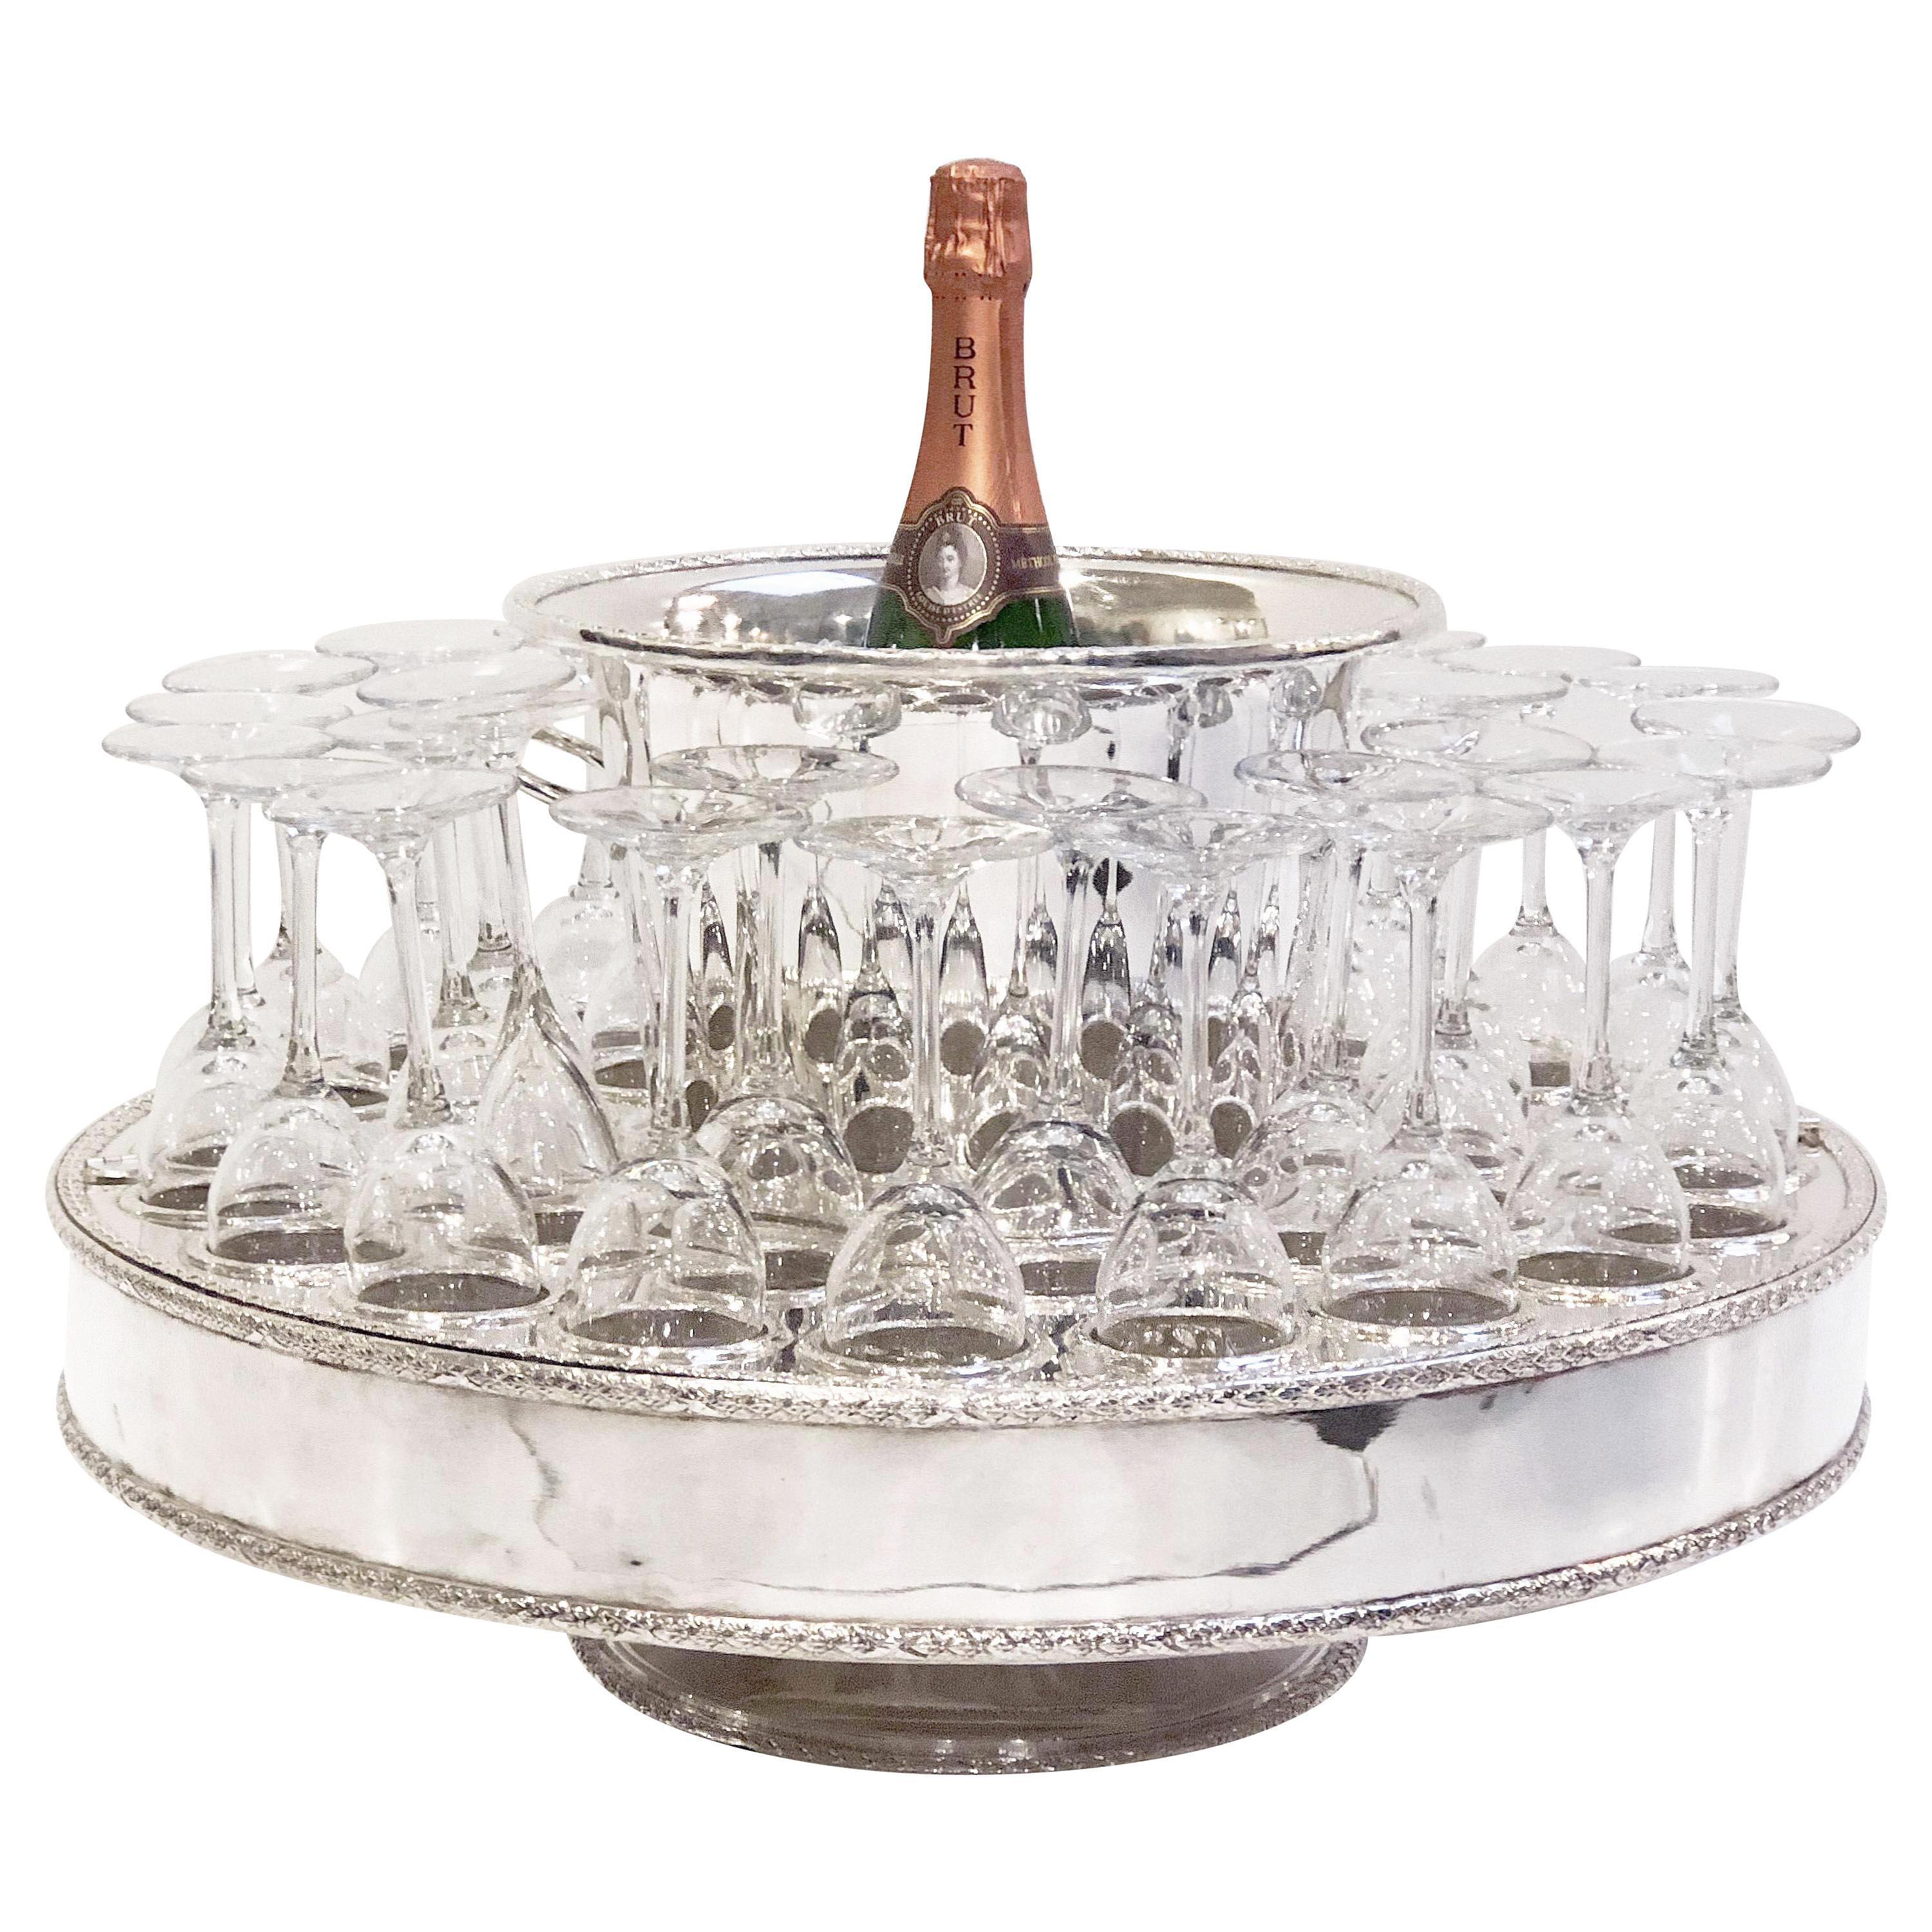 A fine Italian champagne service or presentation centerpiece, featuring a round revolving stand (or lazy susan) of plate silver, with fitted spaces for holding thirty-two champagne flutes and a removable champagne or wine cooler in the inset